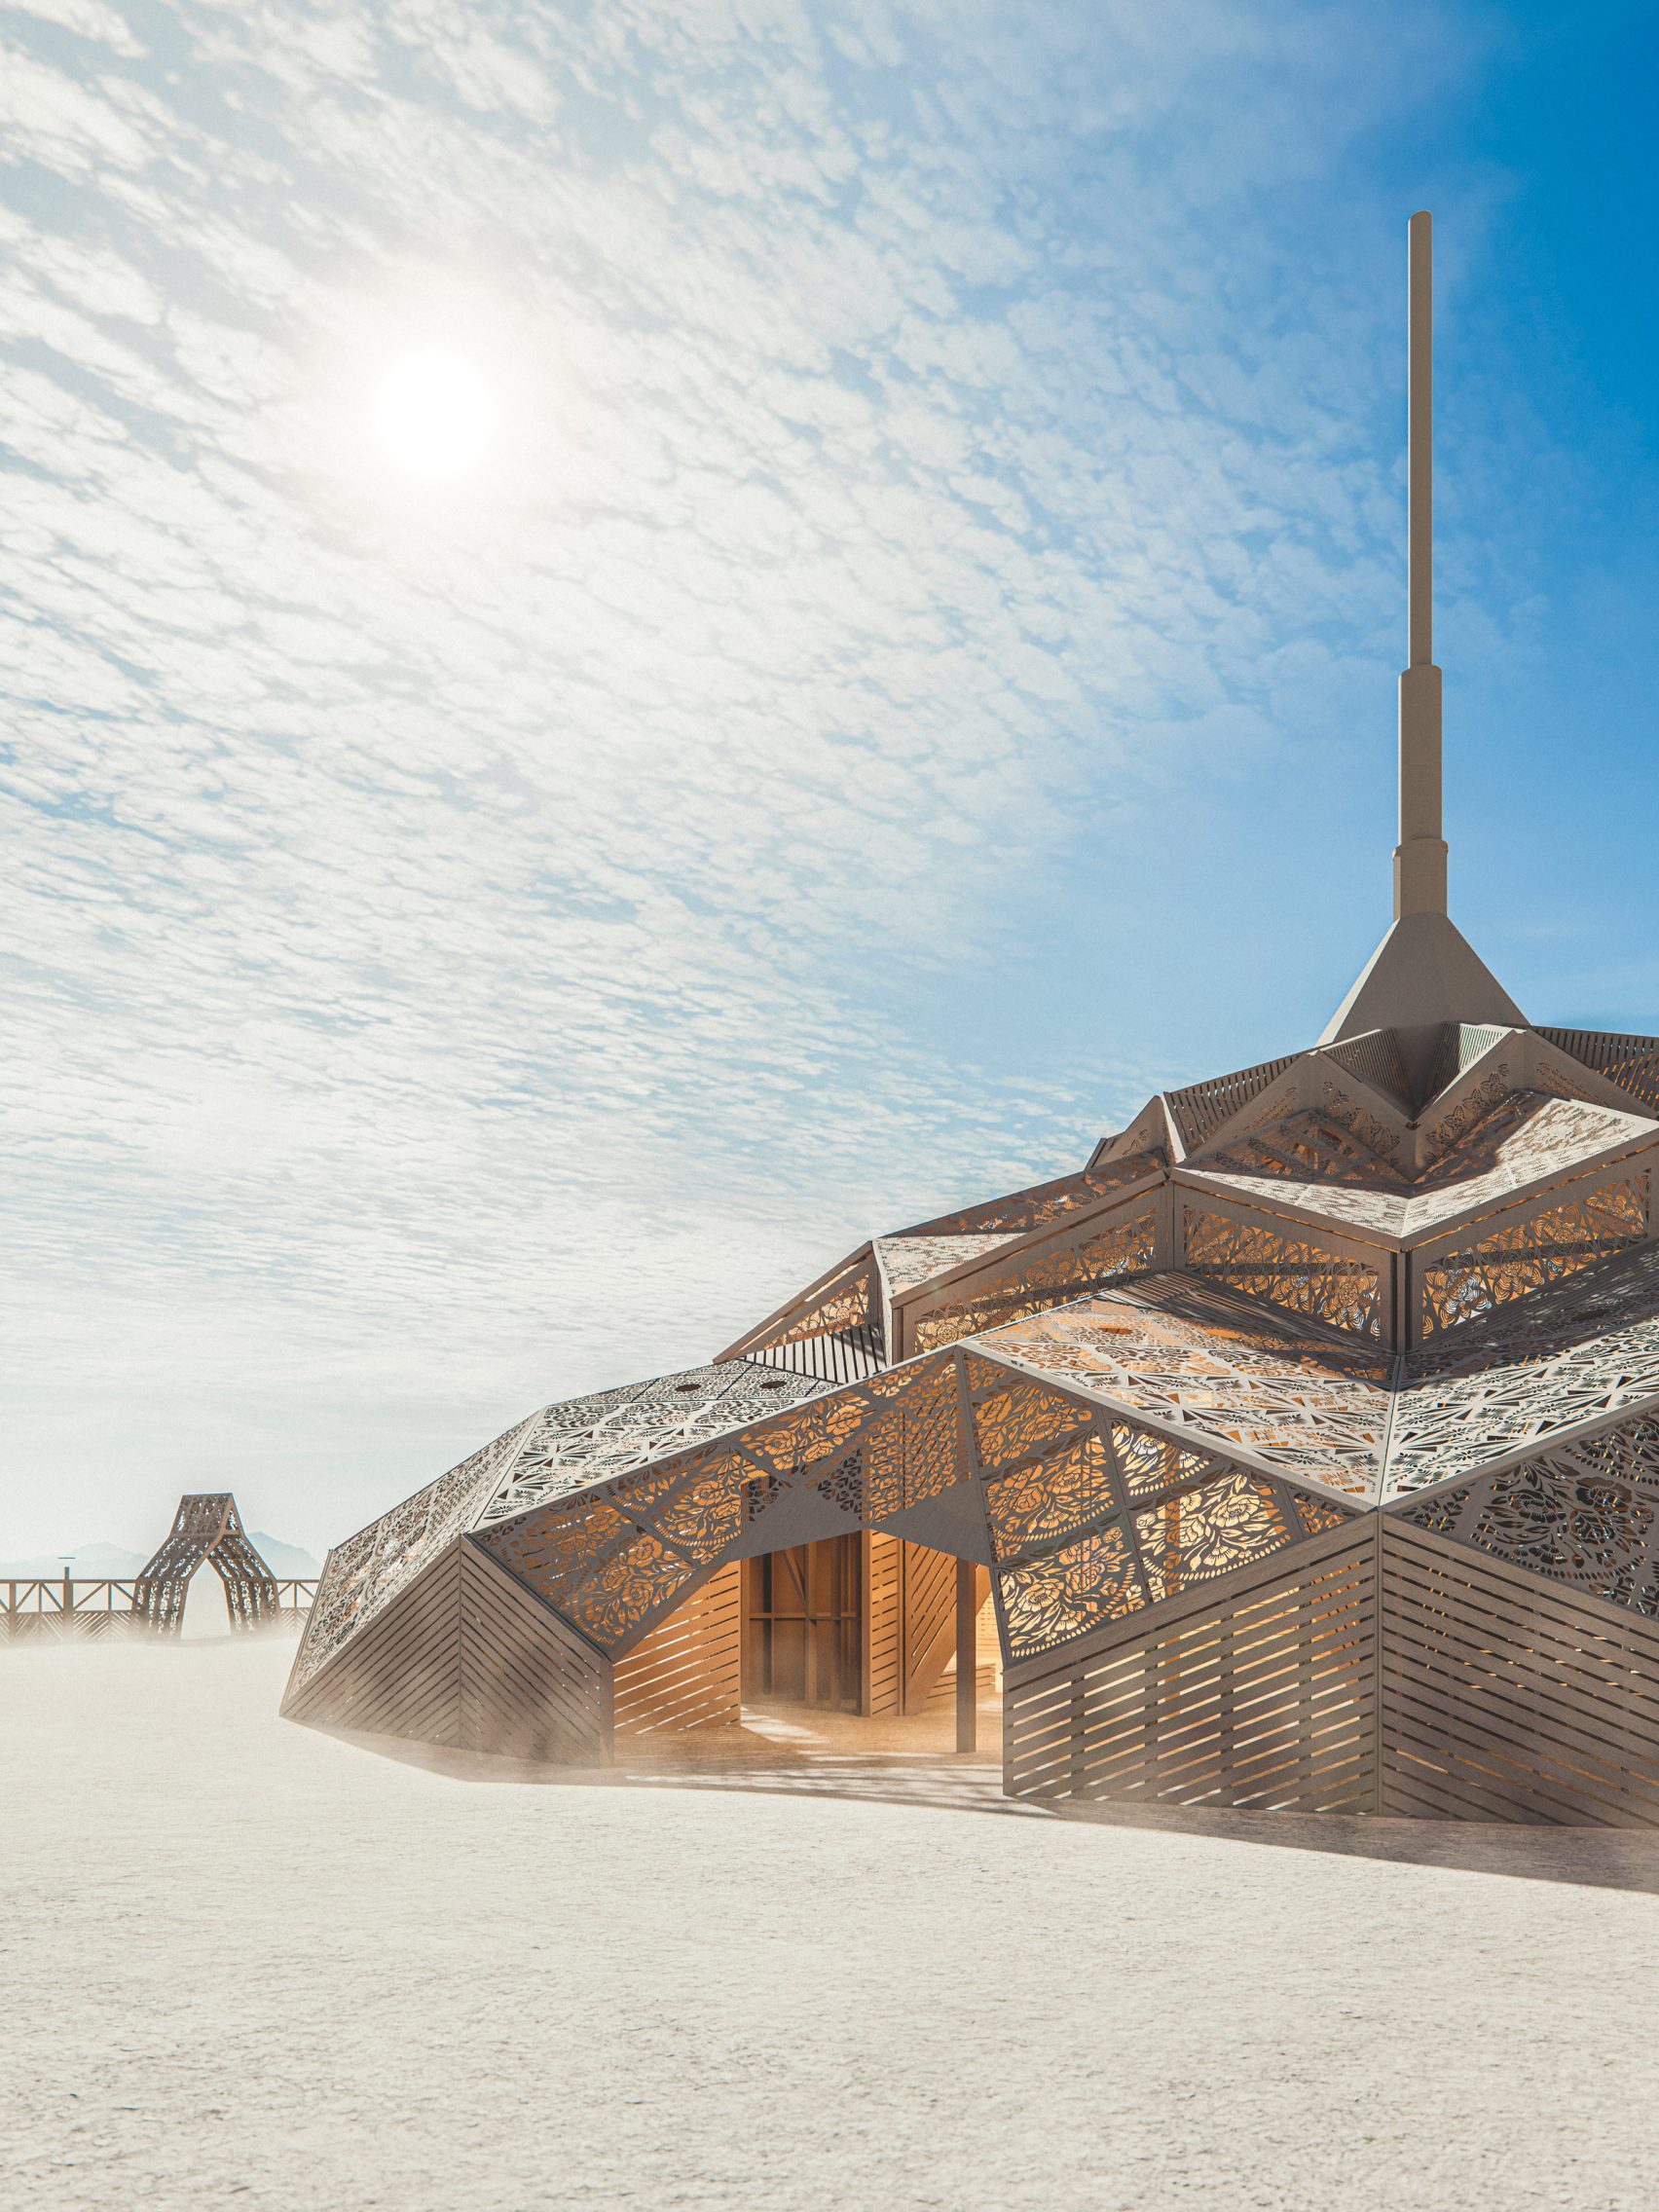 Burning Man temple designed to show "deepest potential of architecture